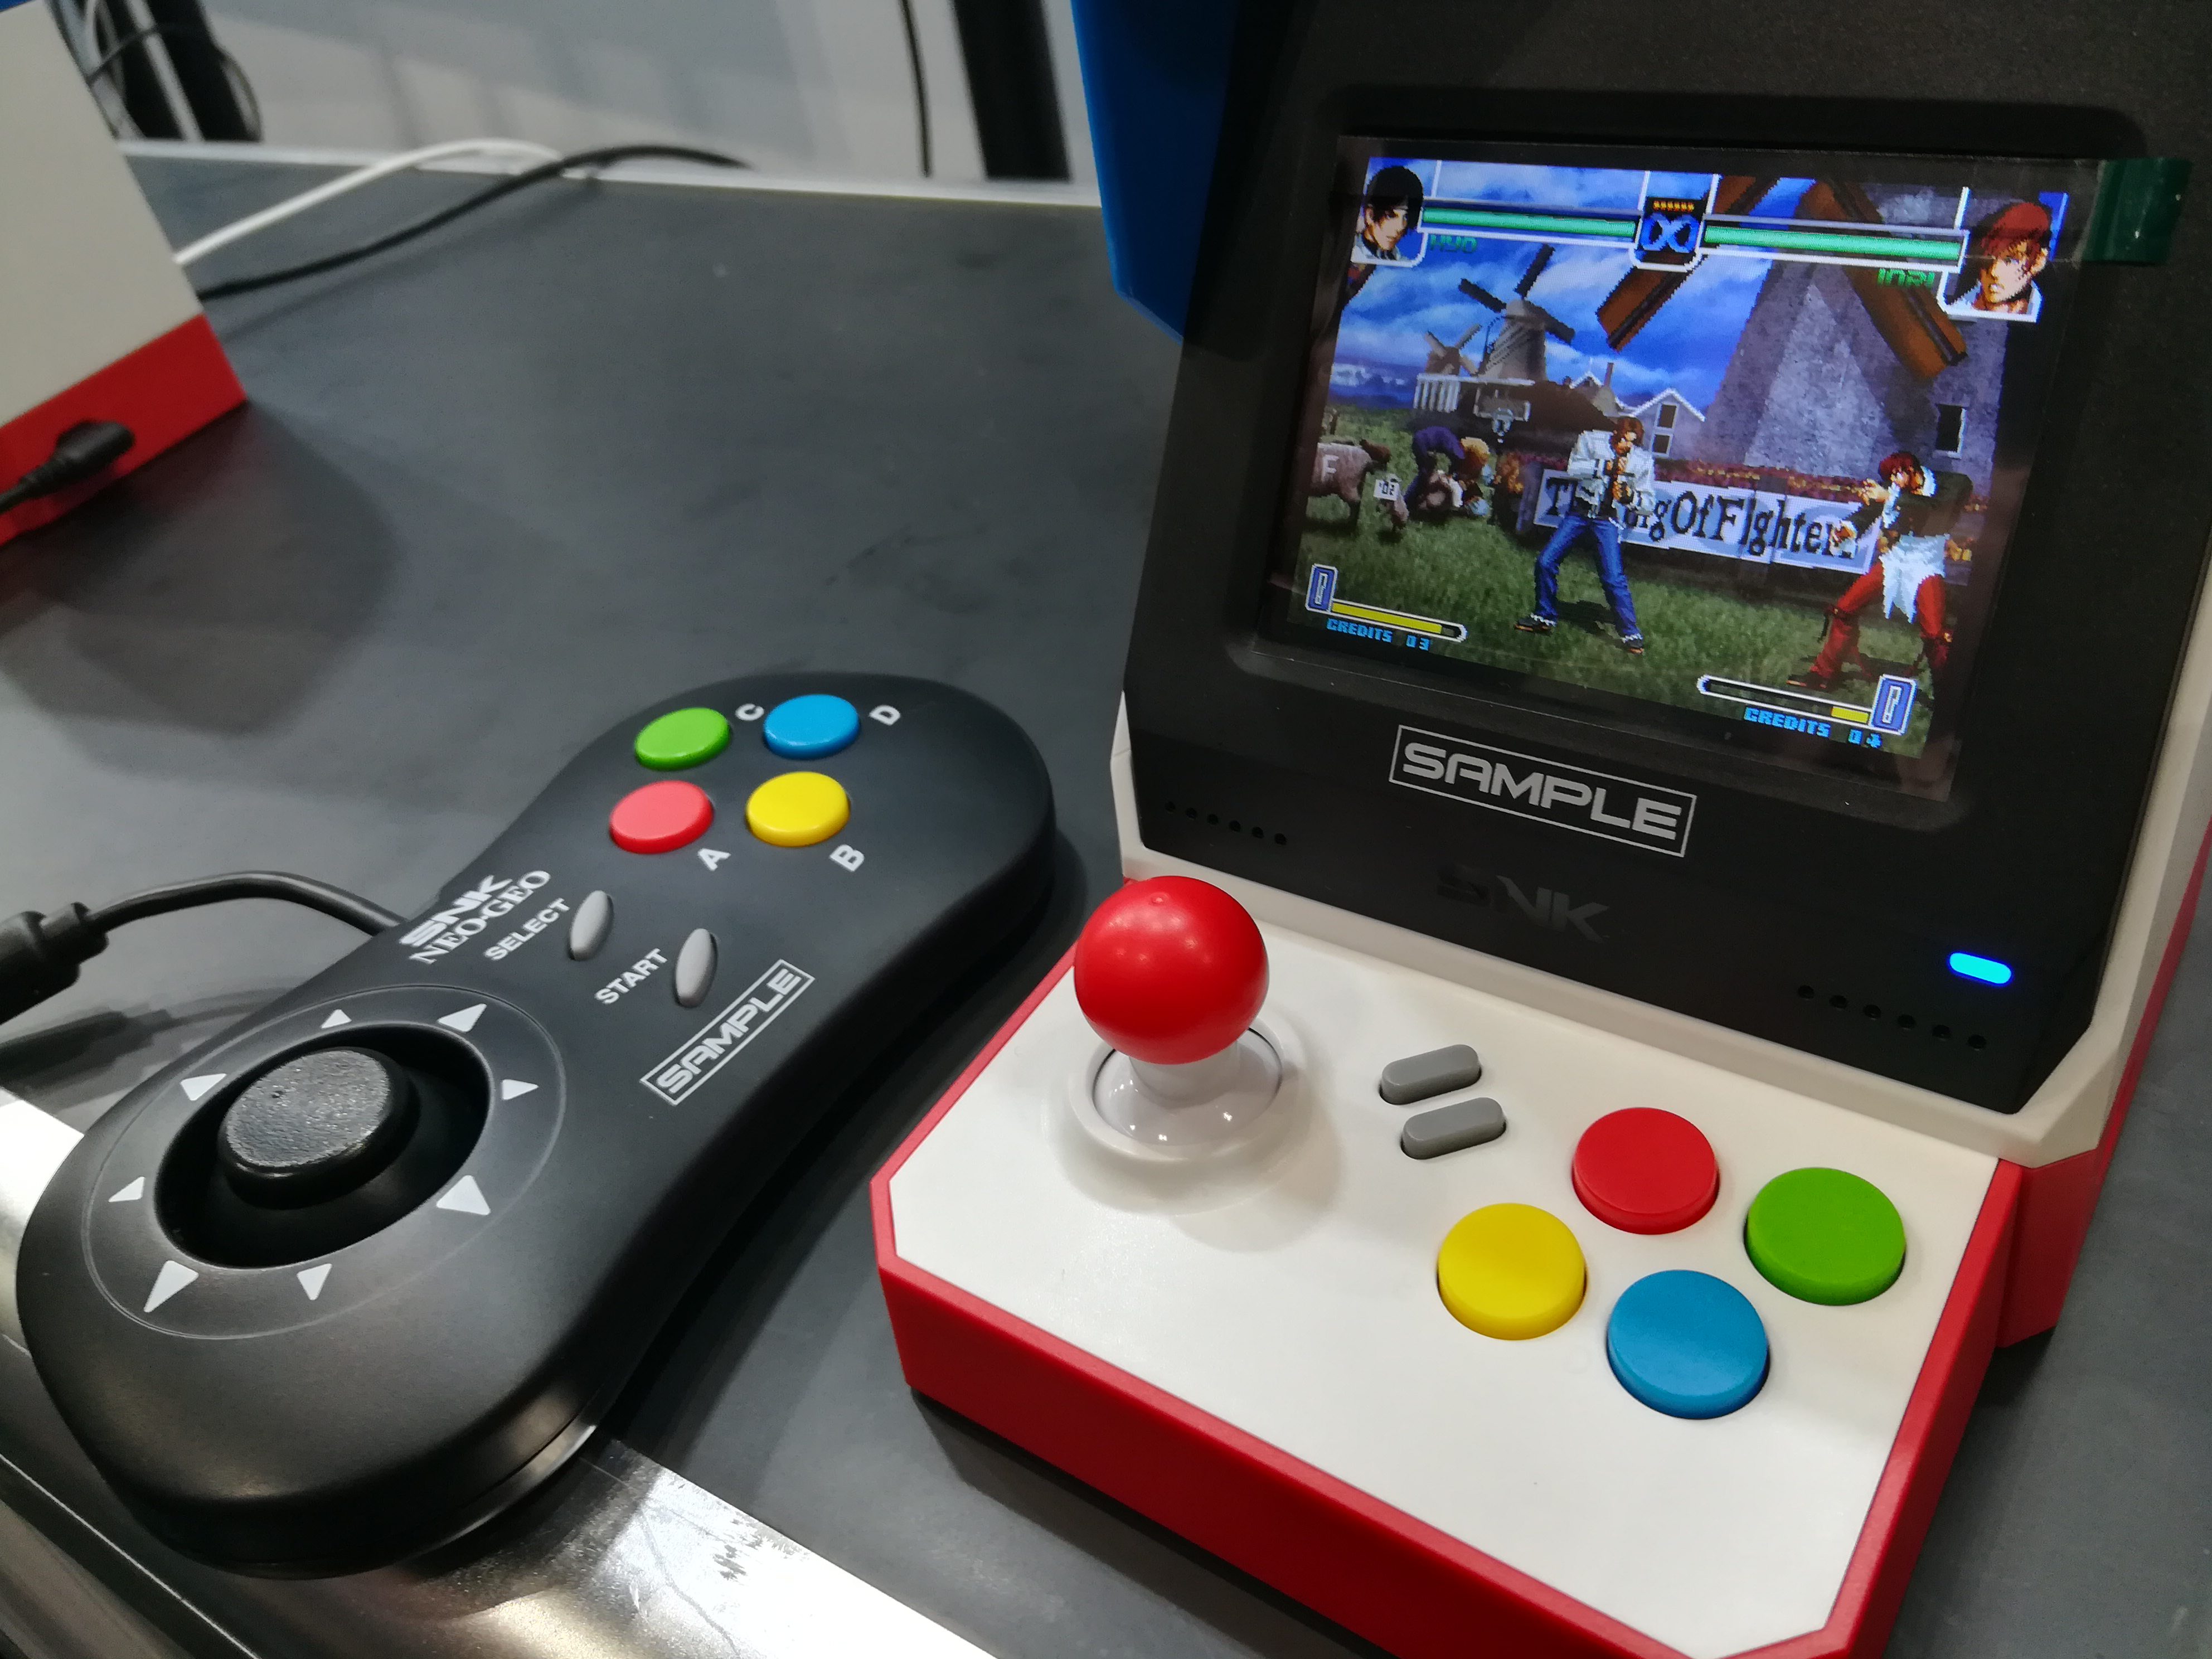 We played with the SNK NeoGeo mini arcade console at E3!